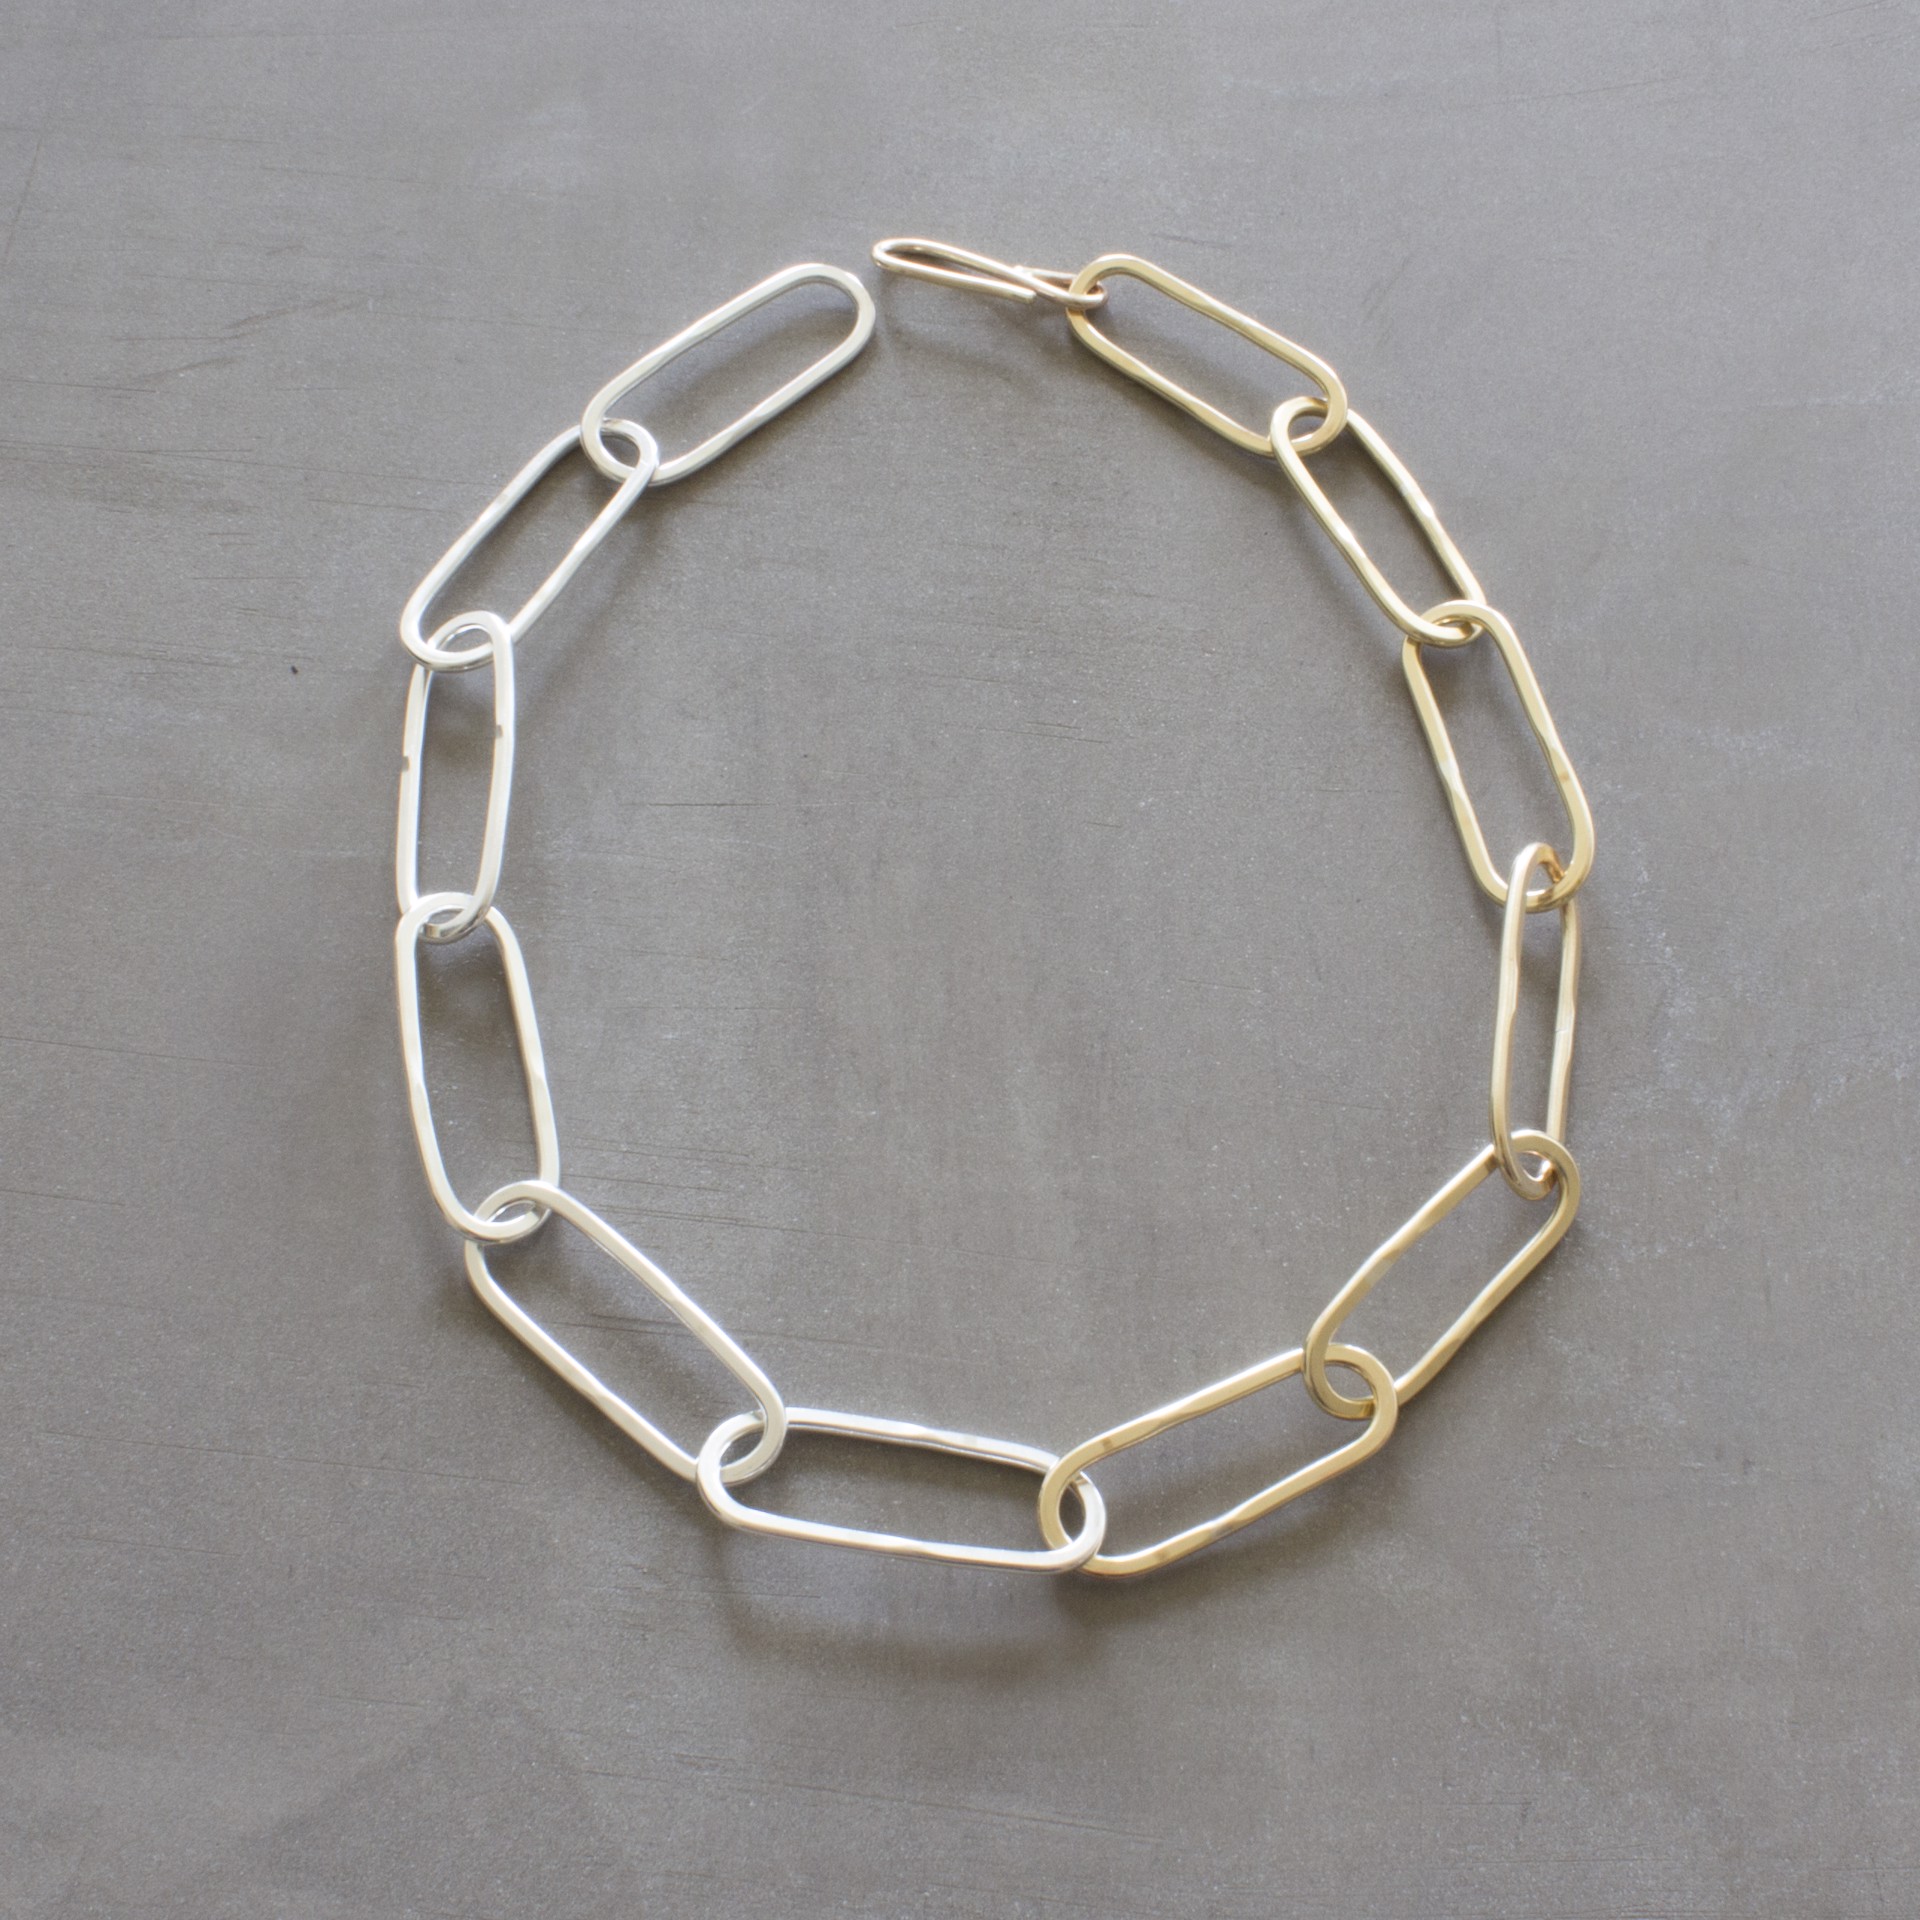 Chunky Chain - Brass and Sterling Silver by Audrey Laine